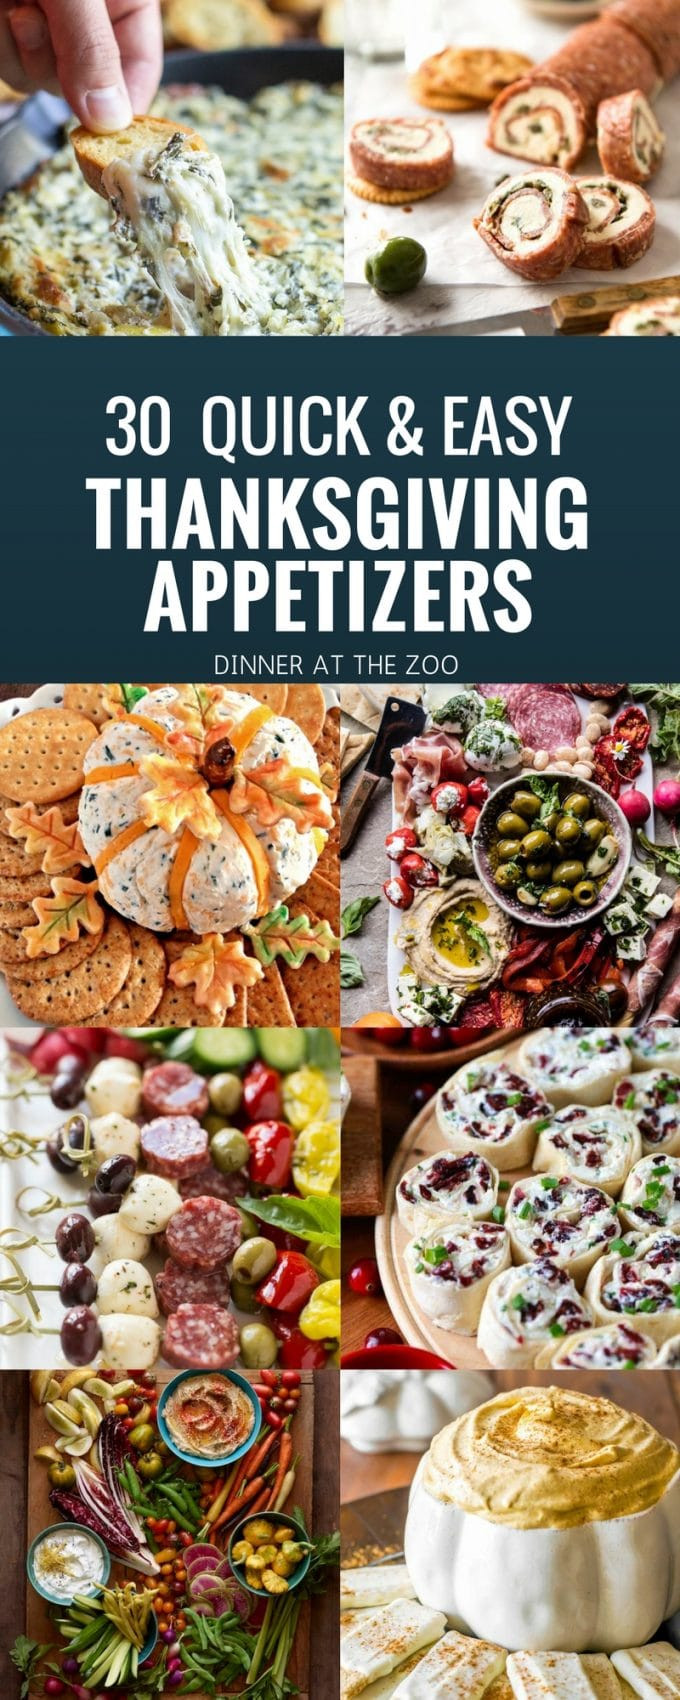 Quick Thanksgiving Appetizers
 30 Thanksgiving Appetizer Recipes Dinner at the Zoo